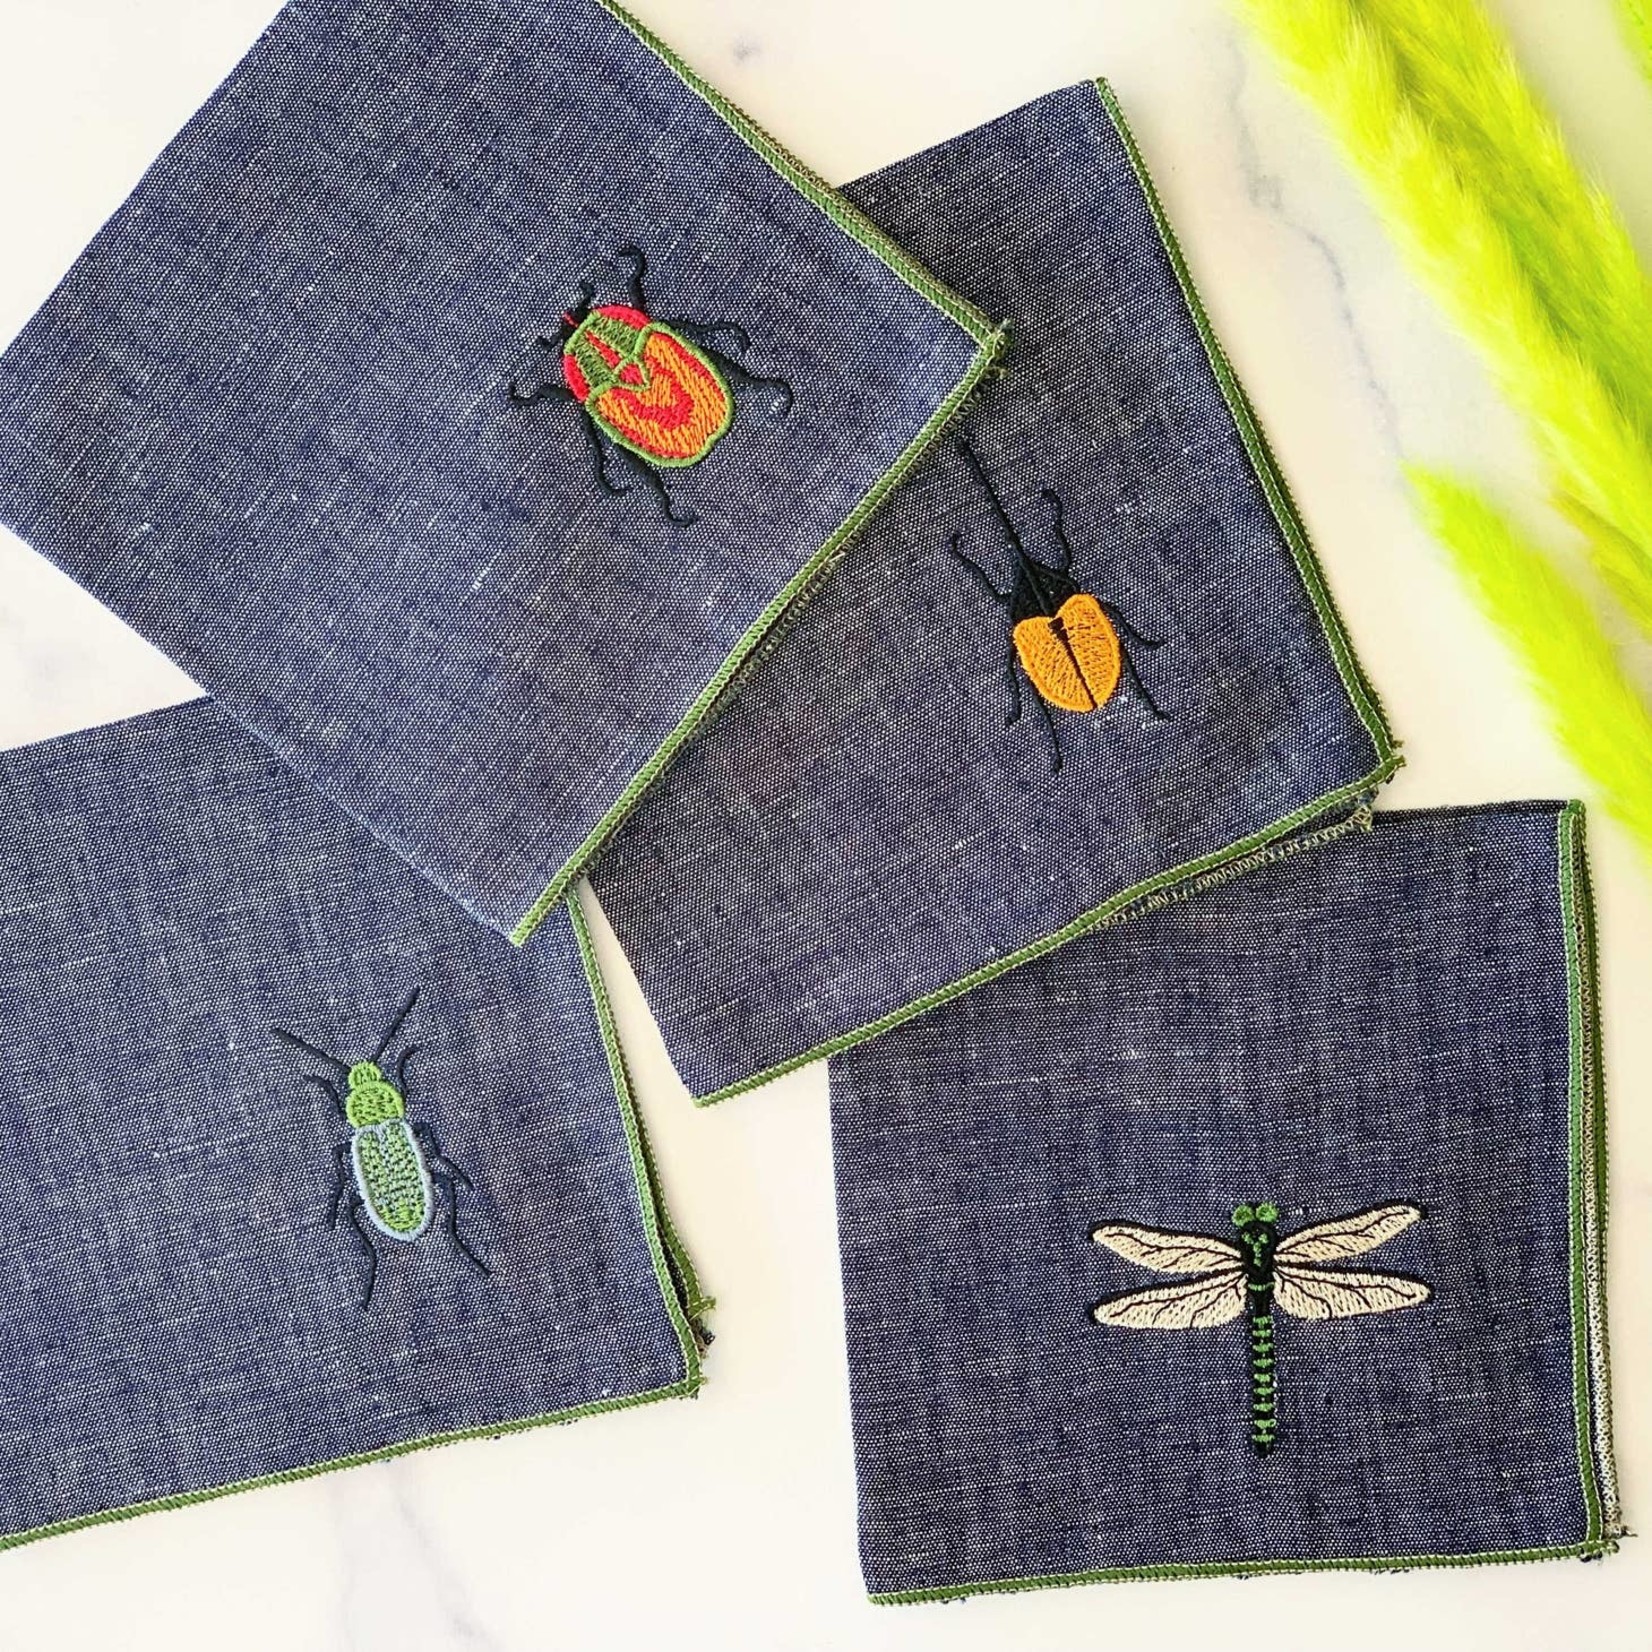 Dot and Army Insect Embroidery Linen Chambray Cocktail Napkins (Set of 4)